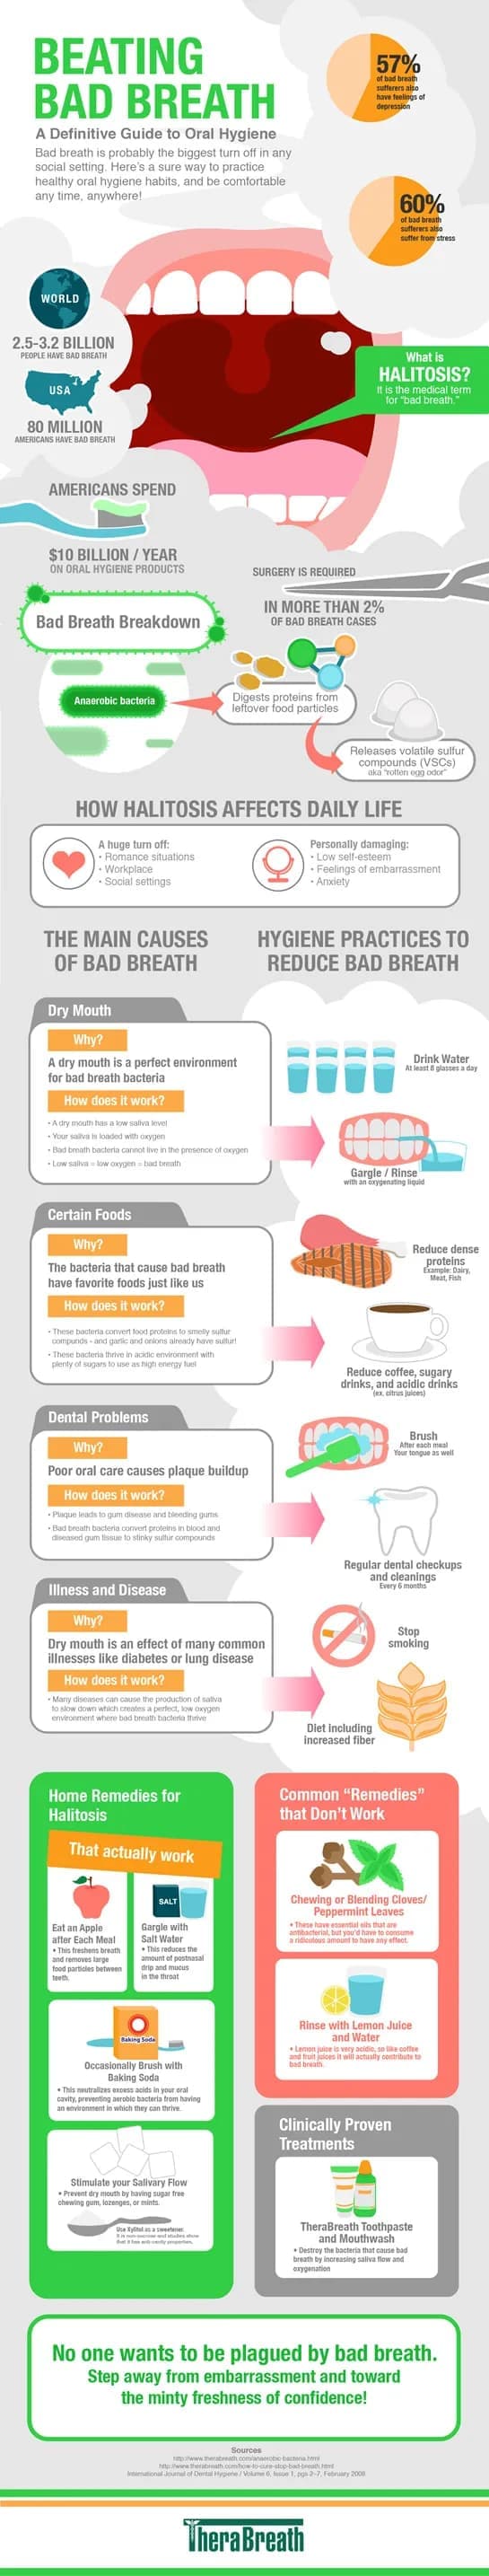 Clear up Bad Breath (Halitosis) Beating Bad Breath Guide Infographic 